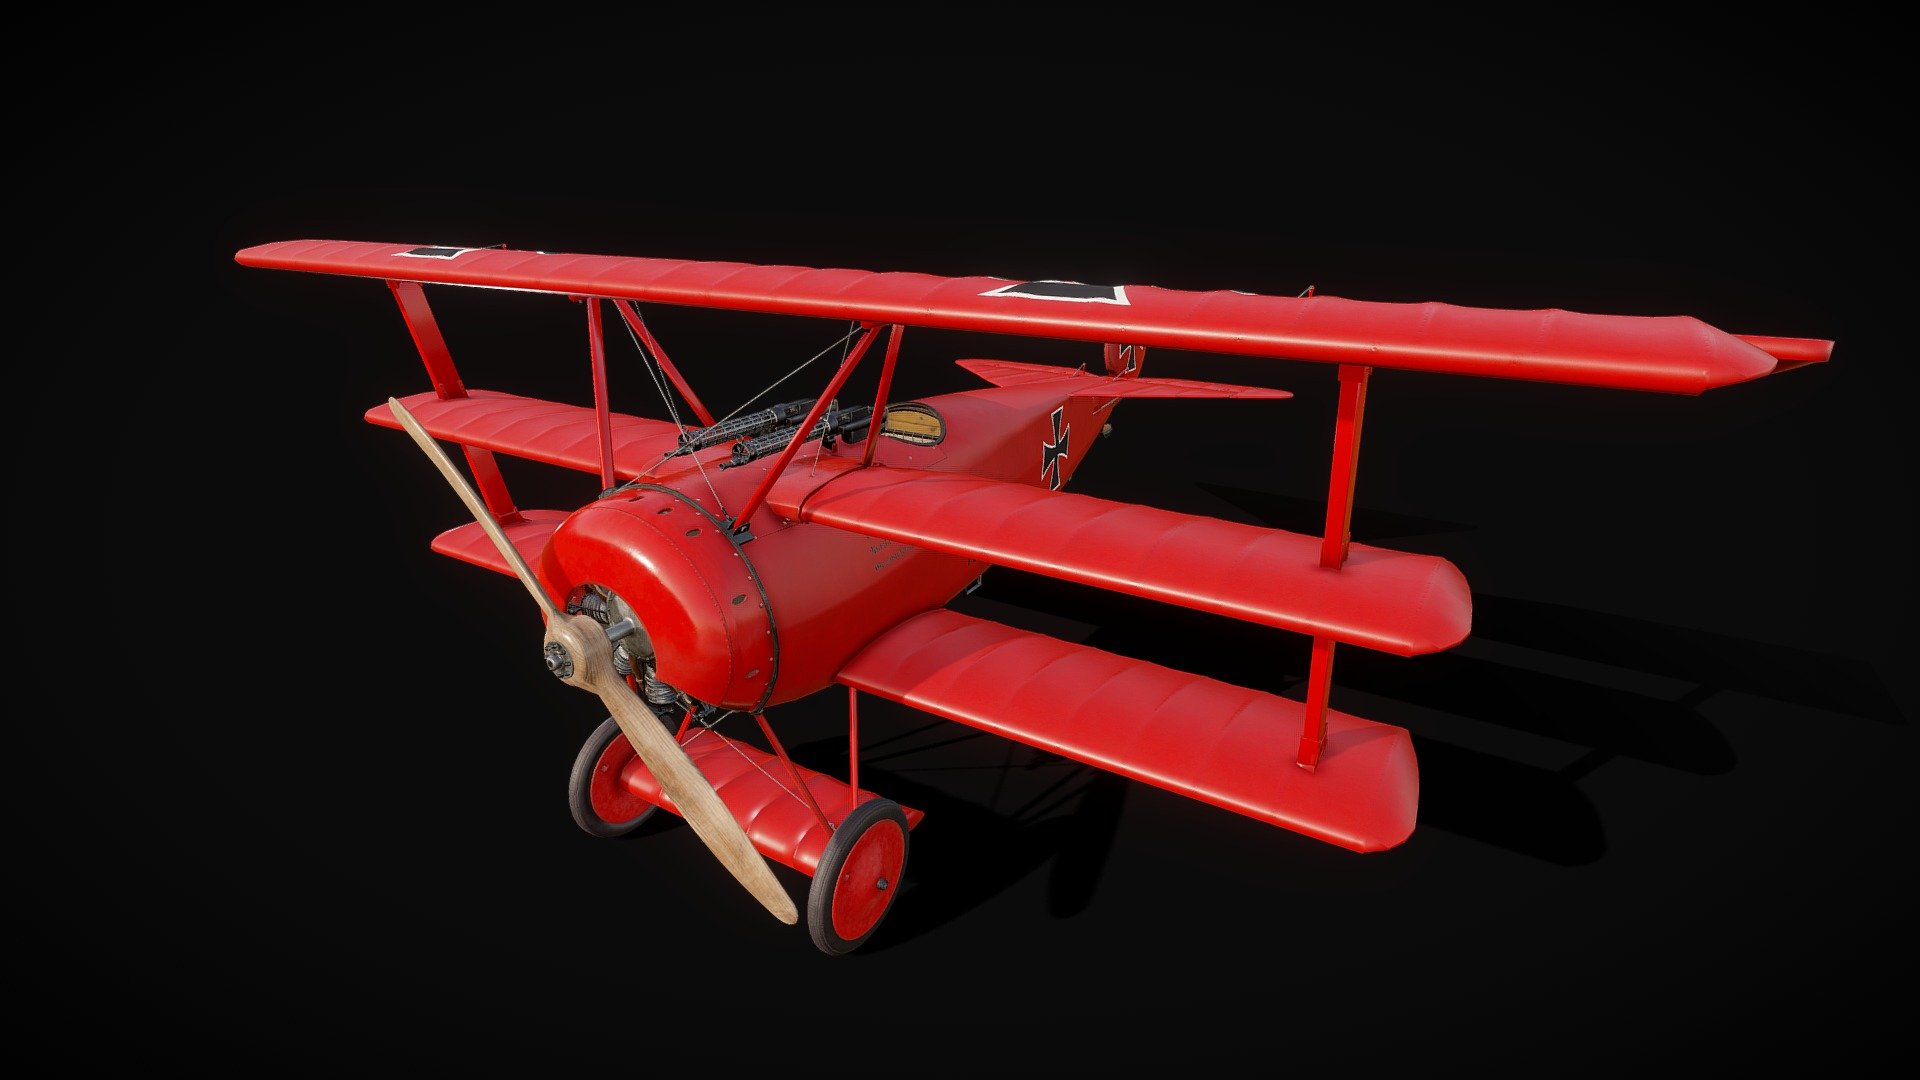 Red Baron
The infamous Red Baron is ready to land in your 3D scene! With his red triplane Fokker DR1, Richtofen is the most famous &ldquo;flying ace